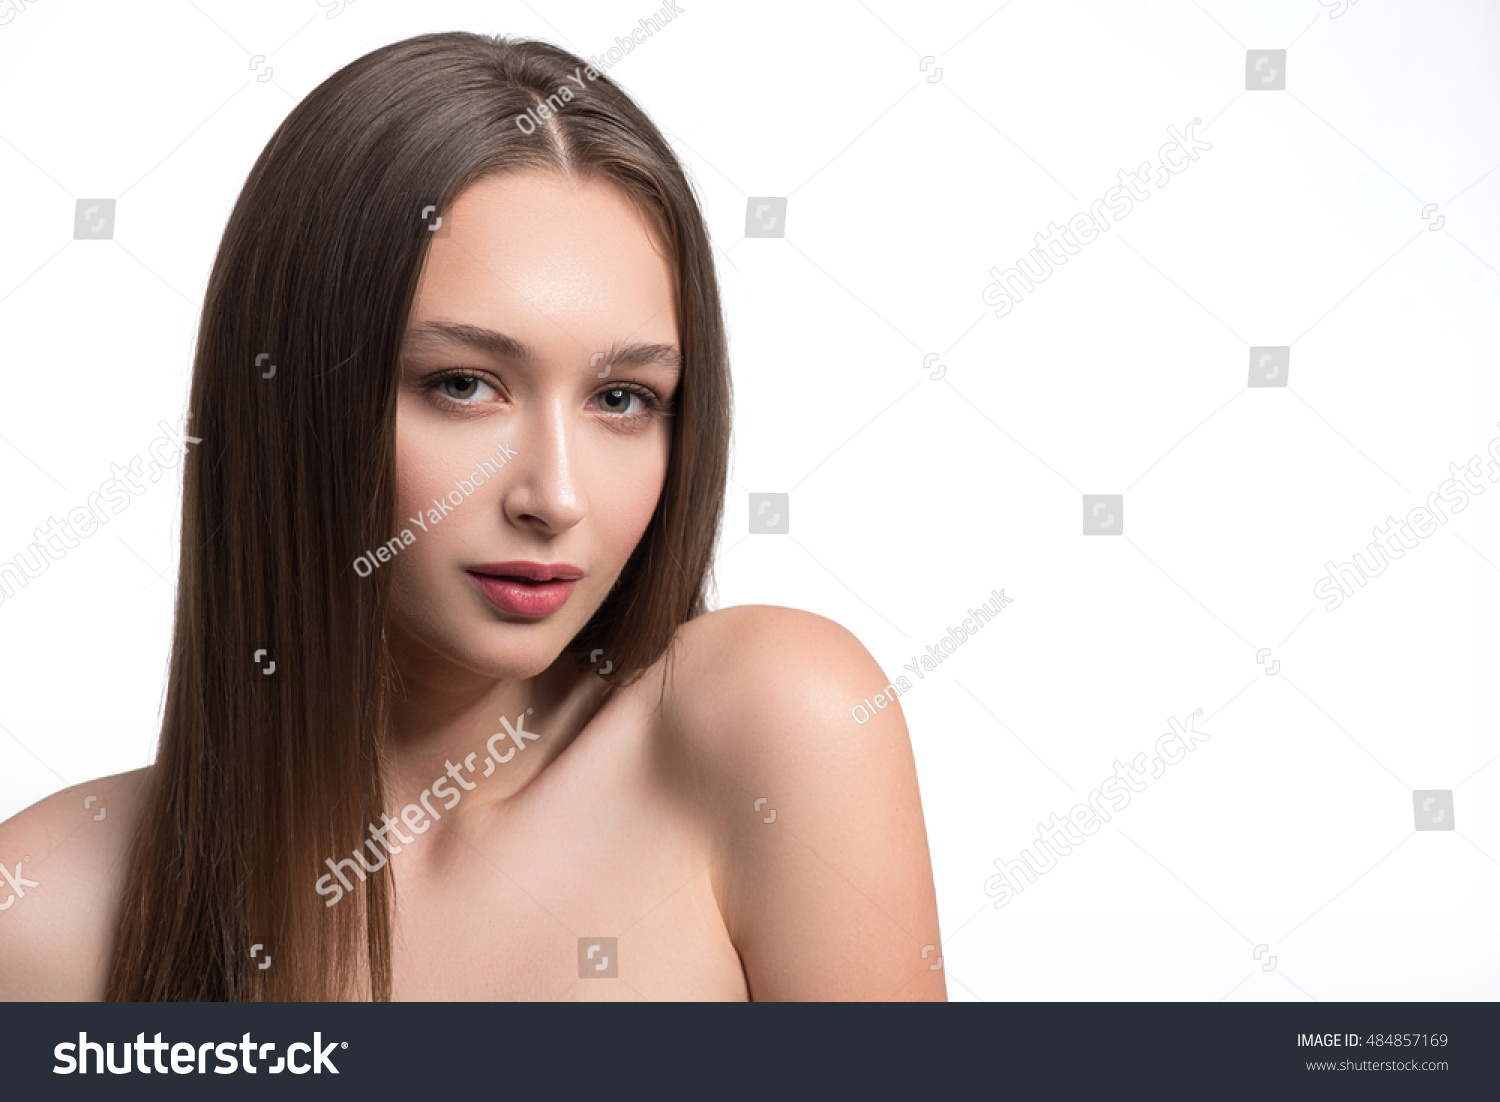 nudes of girls shoulders down hd sex photo